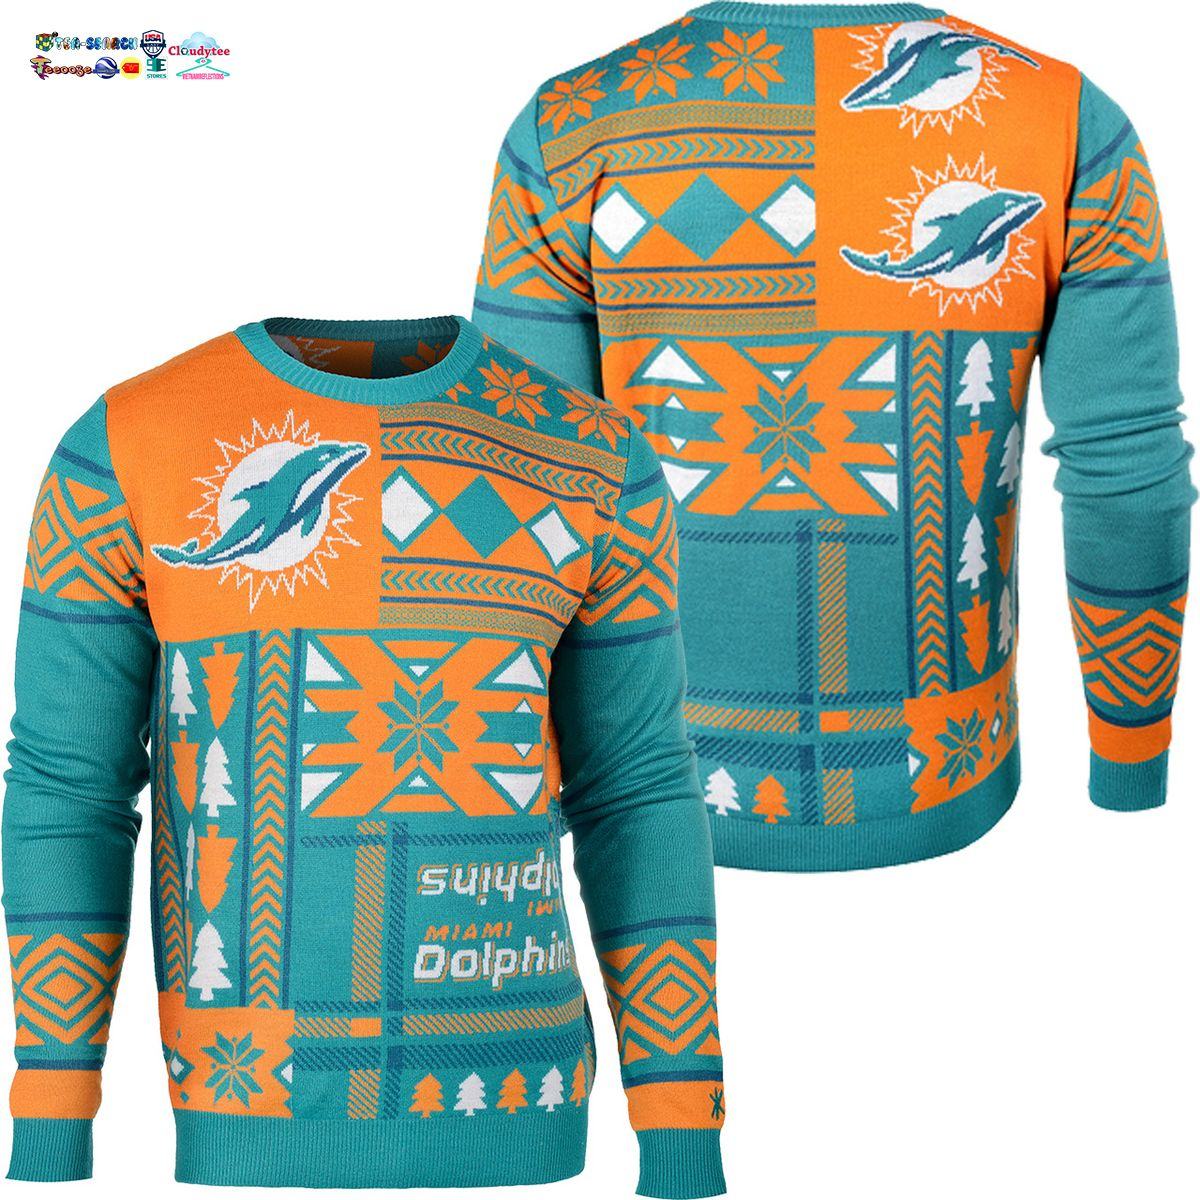 Miami Dolphins Shop - Miami Dolphins Patches NFL Ugly Christmas Sweater